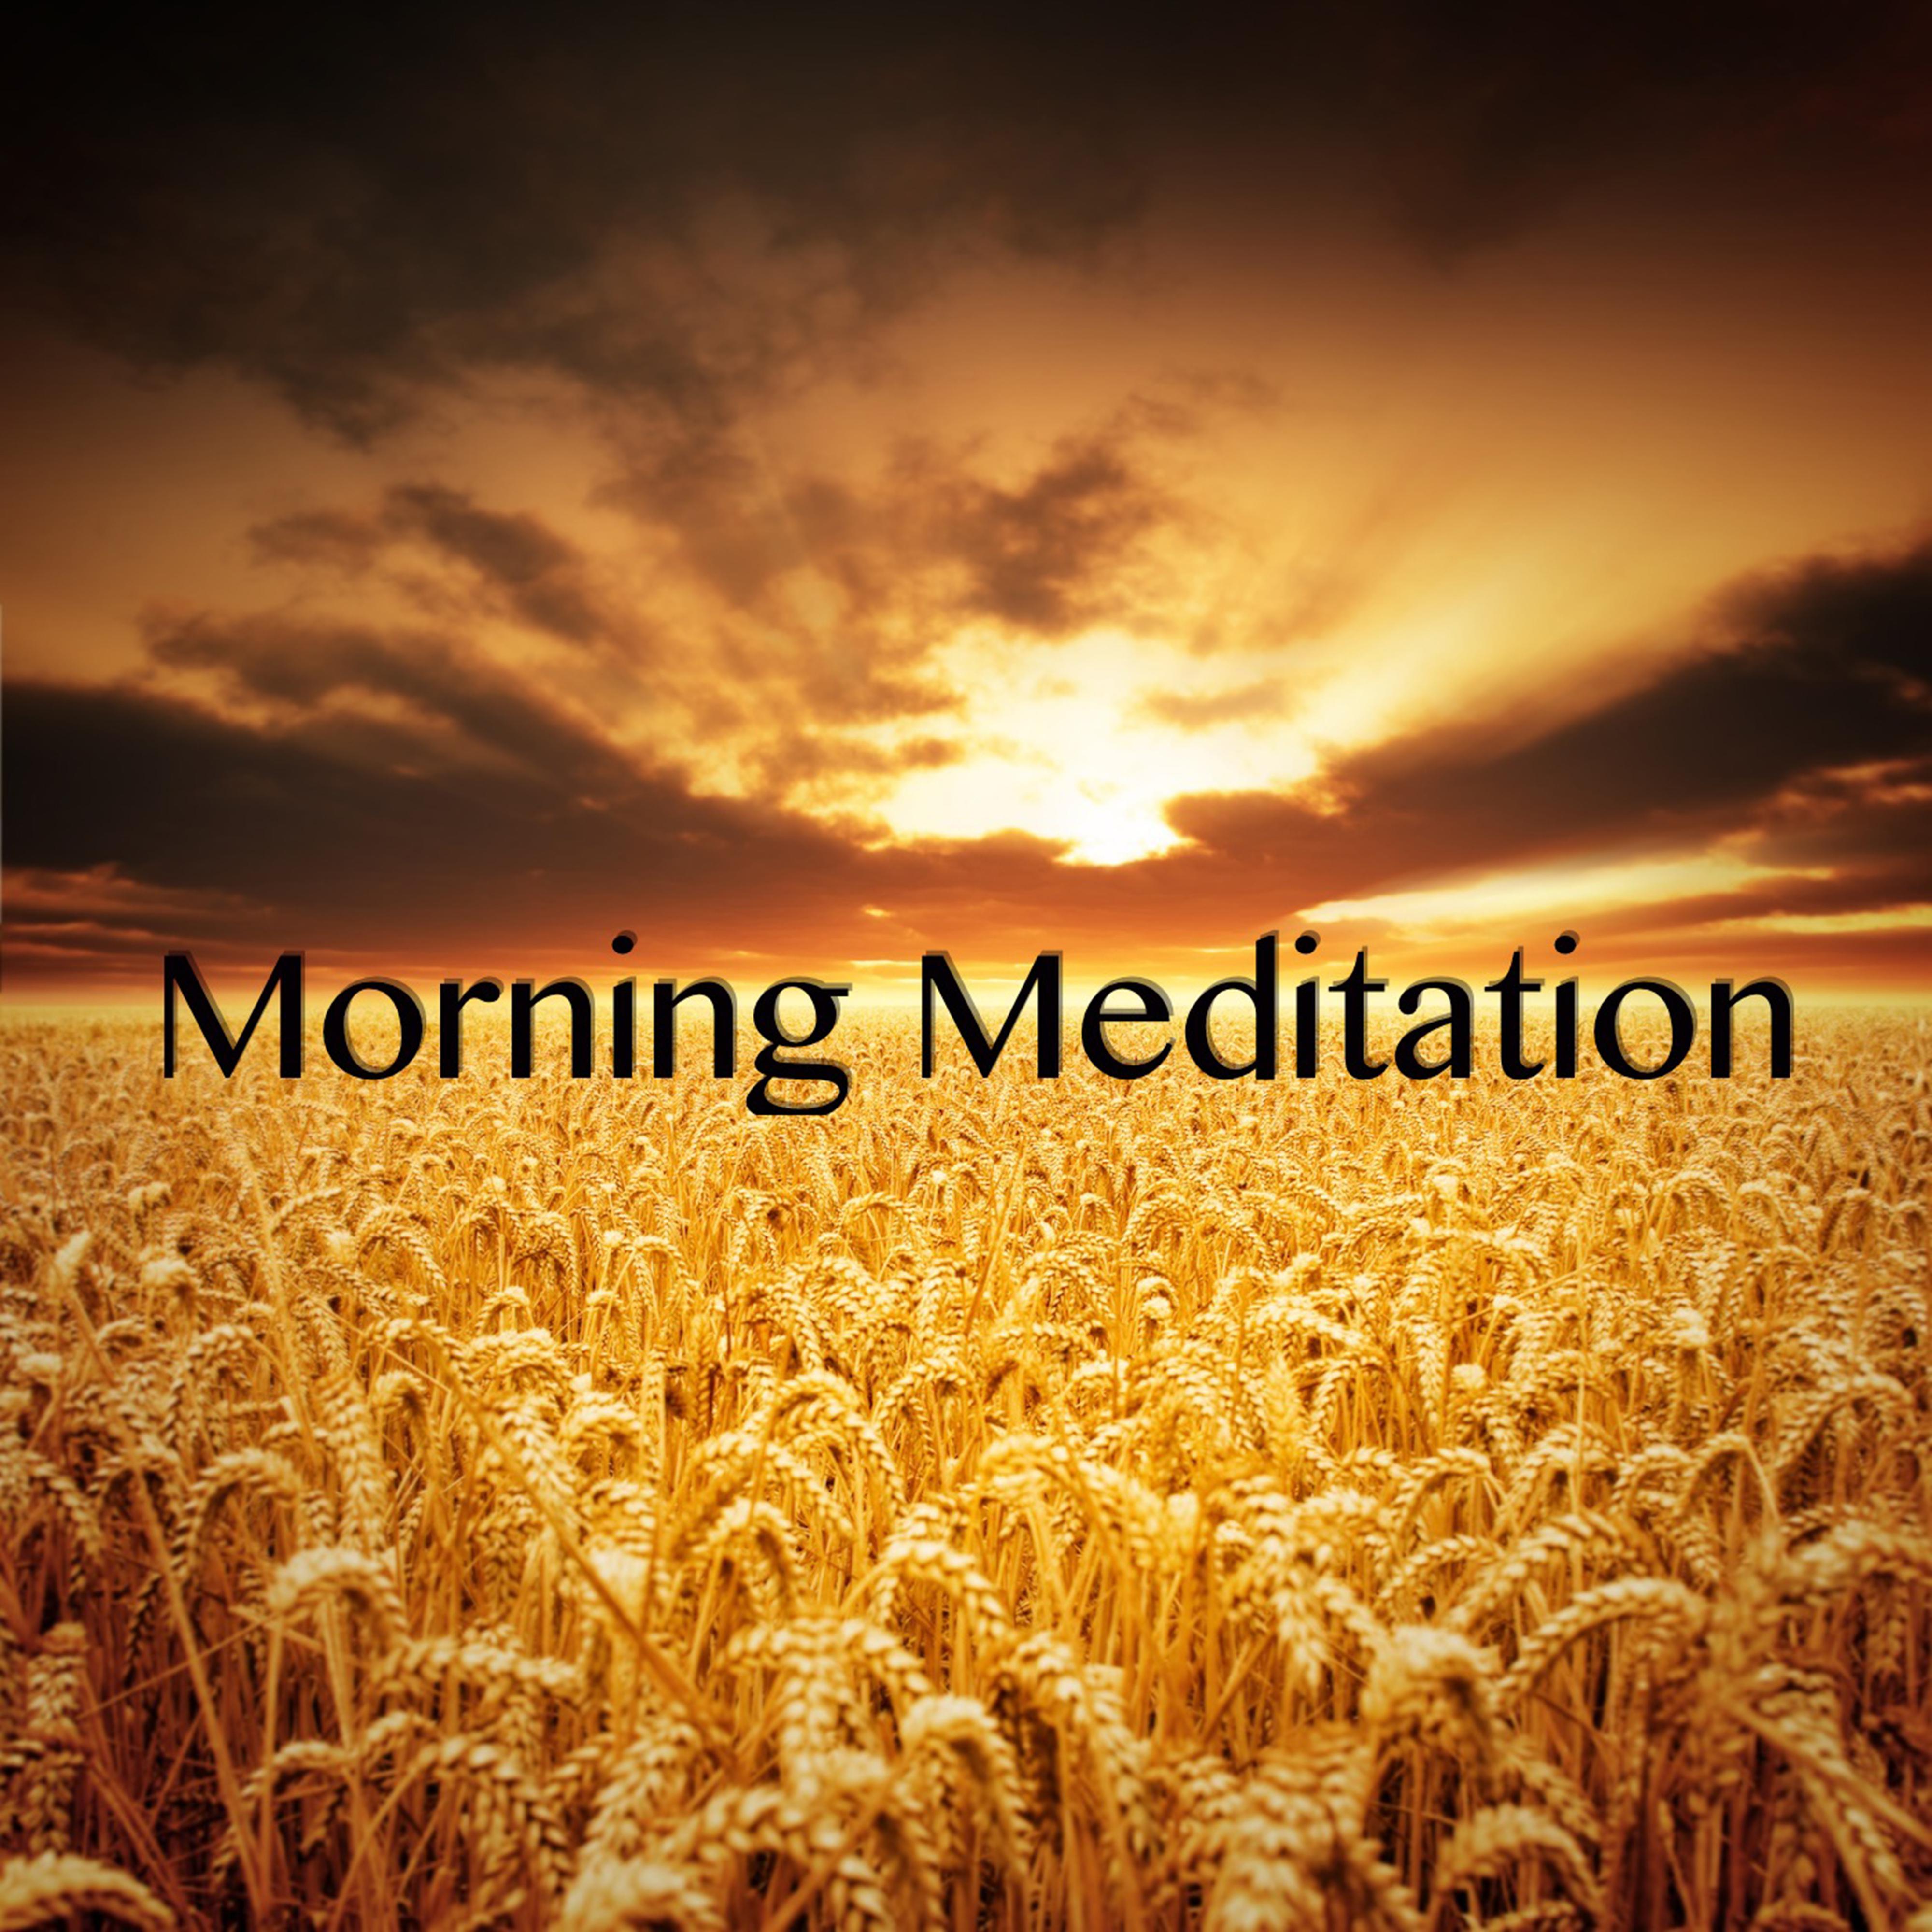 Morning Meditation - Meditations and Stress Relaxation Music, Soothing Relaxing Sounds for Anxiety, Depression and Negative Thoughts